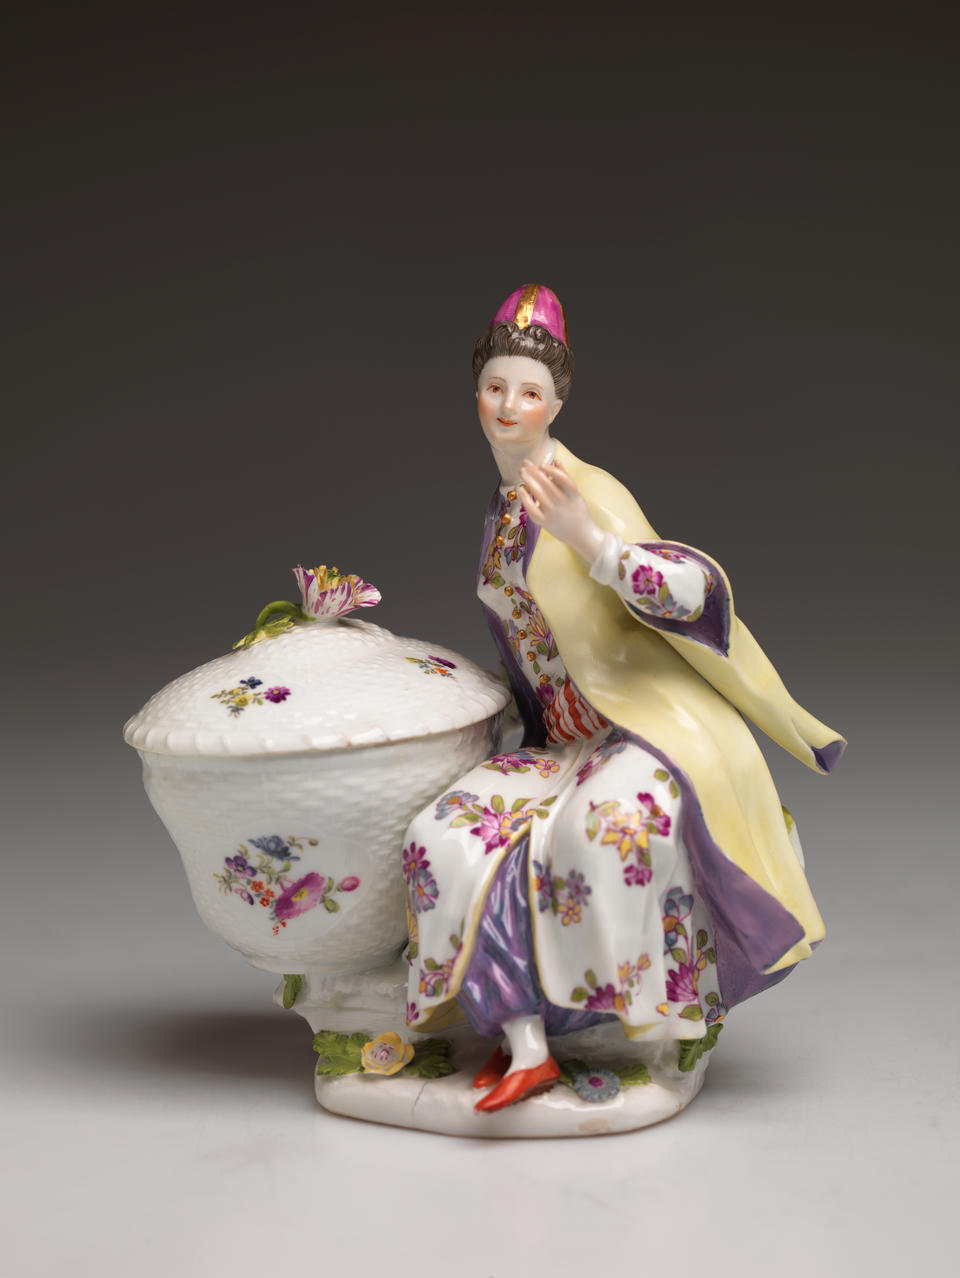 A sculptural figure sitting next to a large basket, the basket and figures clothing has floral decorations. The figure is wearing a hat, cream and purple clothing, and red shoes. 